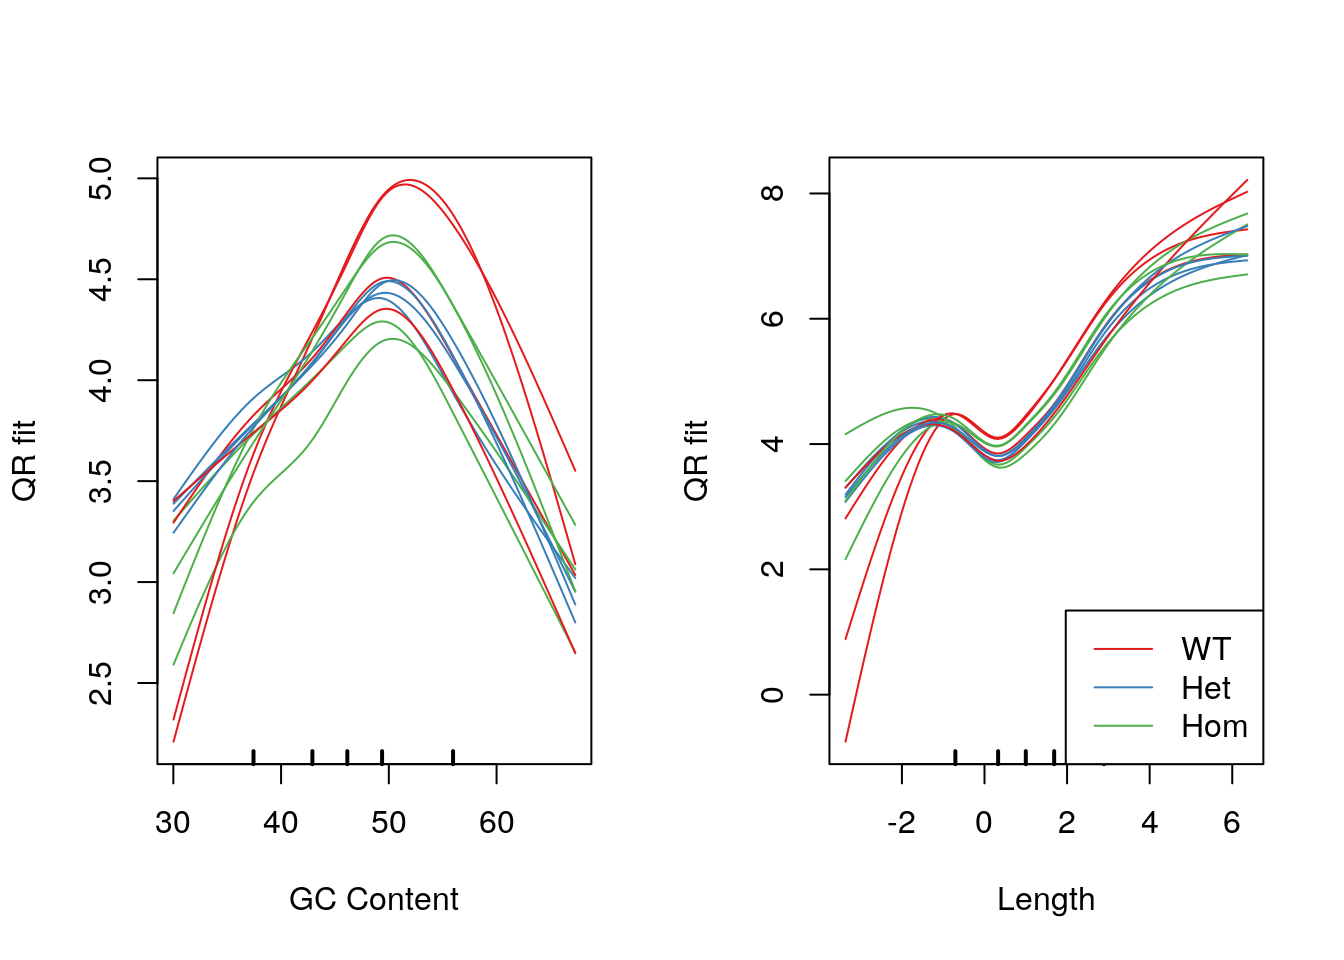 *Model fits for GC content and gene length under the CQN model. Genotype-specific effects are clearly visible.*